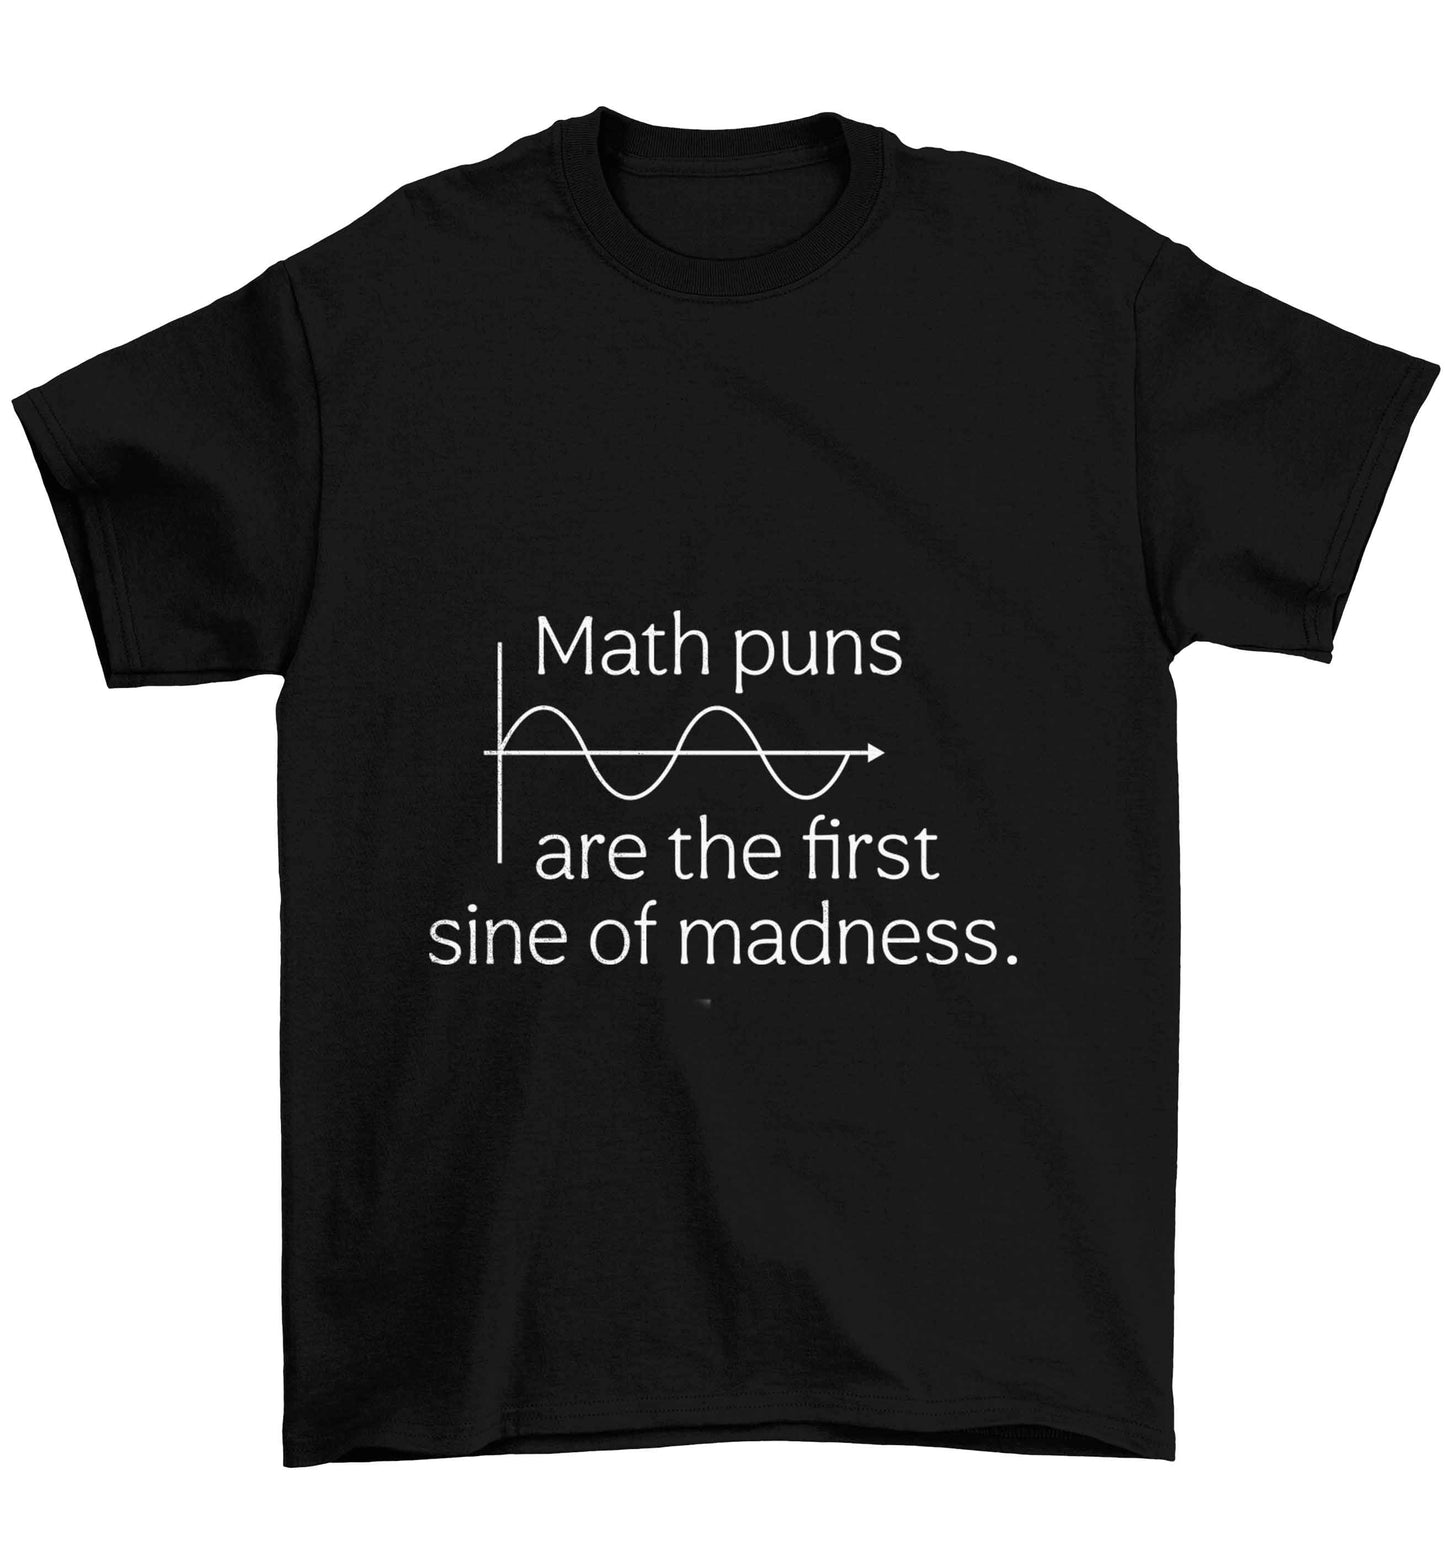 Math puns are the first sine of madness Children's black Tshirt 12-13 Years